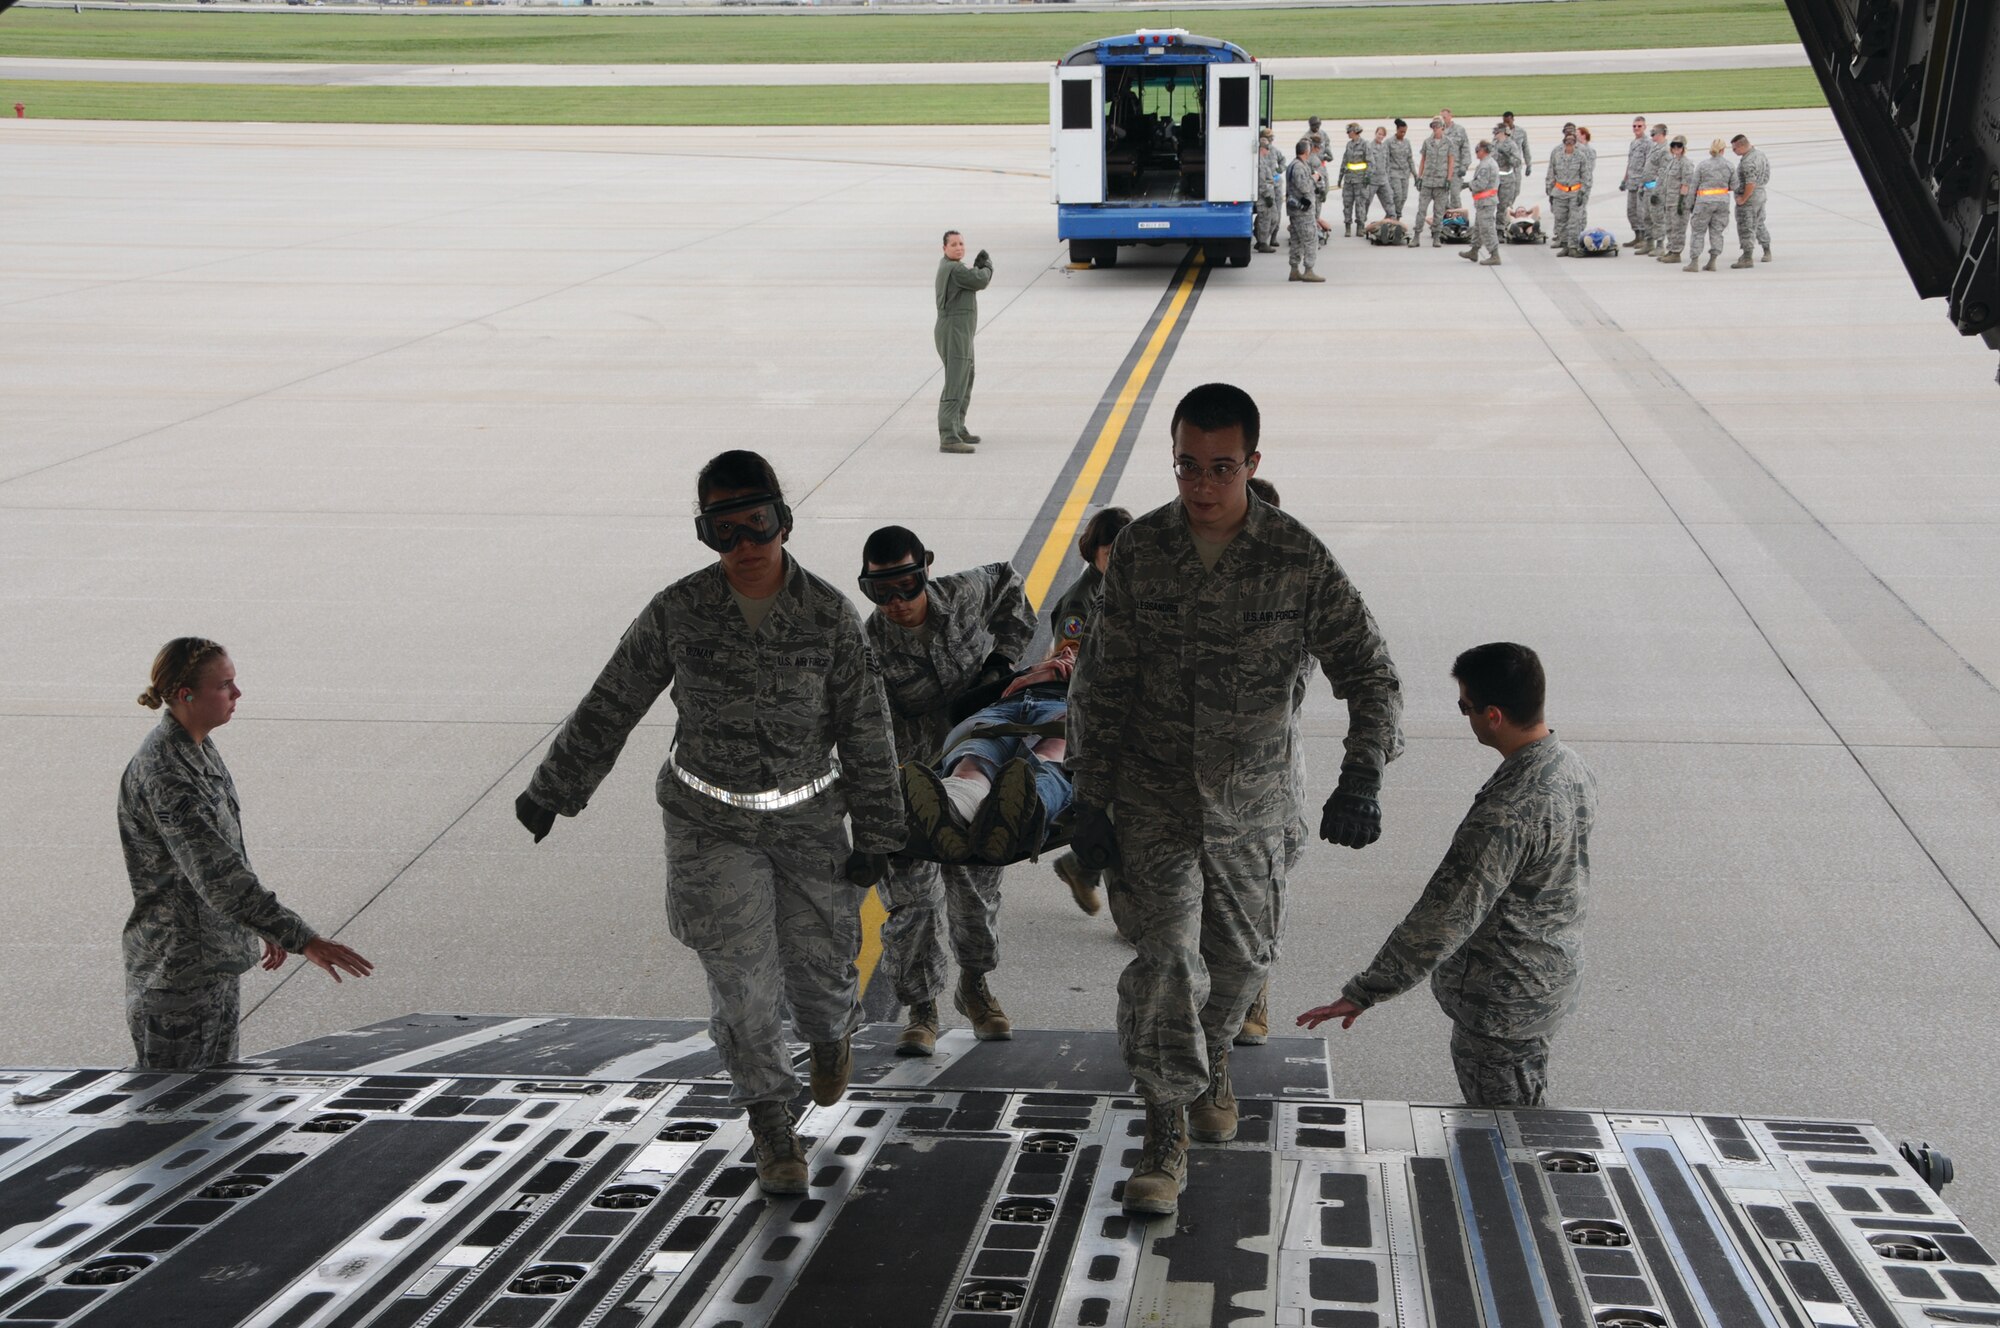 Tech. Sgt. Rebecca Guzman, 445th Aeromedical Staging Squadron aerospace medicine services craftsman, Senior Airman Robert Dallessandris, 445 AMDS medical services technician and other medical personnel, carry a “patient” on an awaiting C-17 during the disaster response exercise Sept.  9. (Capt. John Stamm)